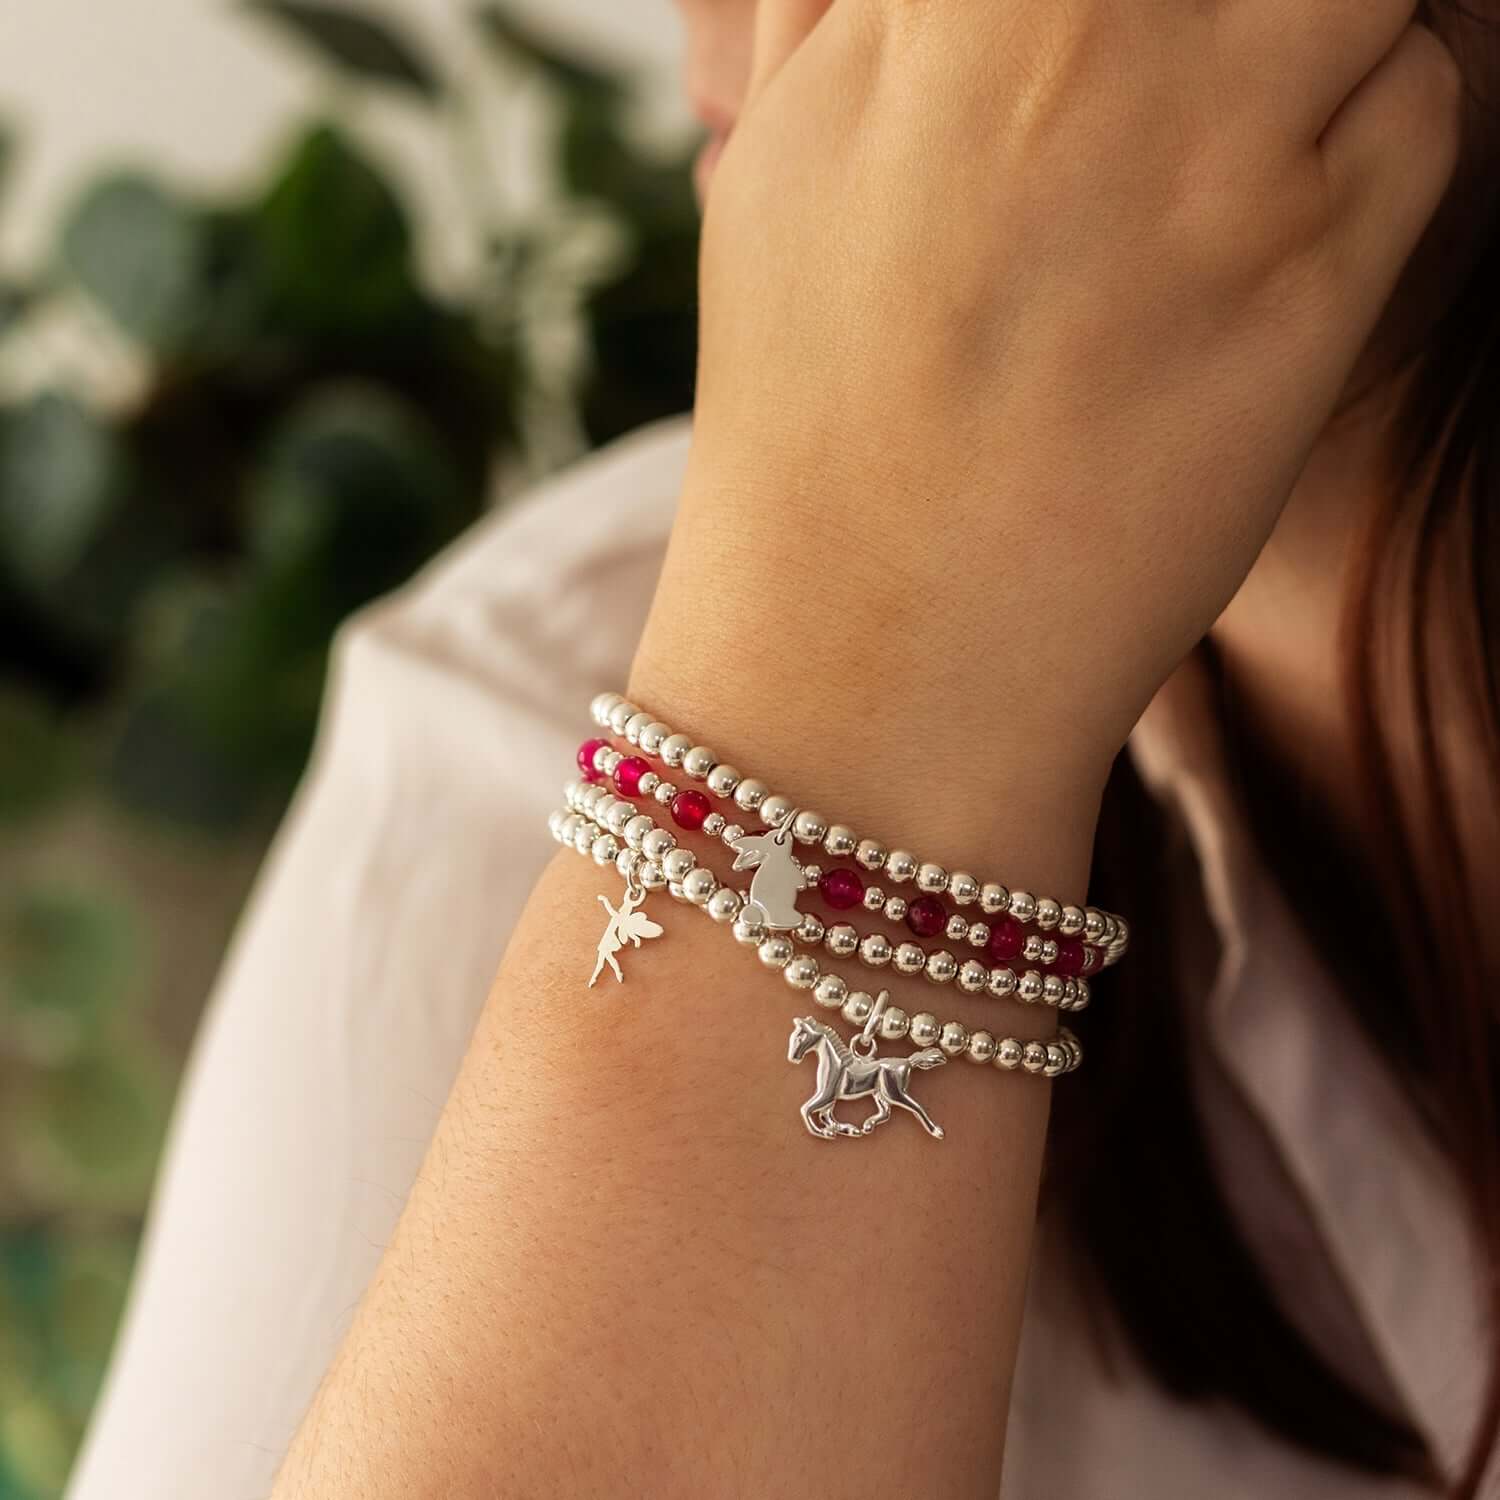  A person wearing a sterling silver charm bracelet adorned with small charms shaped like a fairy, a bunny, and a running horse. The bracelet features alternating red and silver beads. The person's arm is shown close-up with a blurred green background